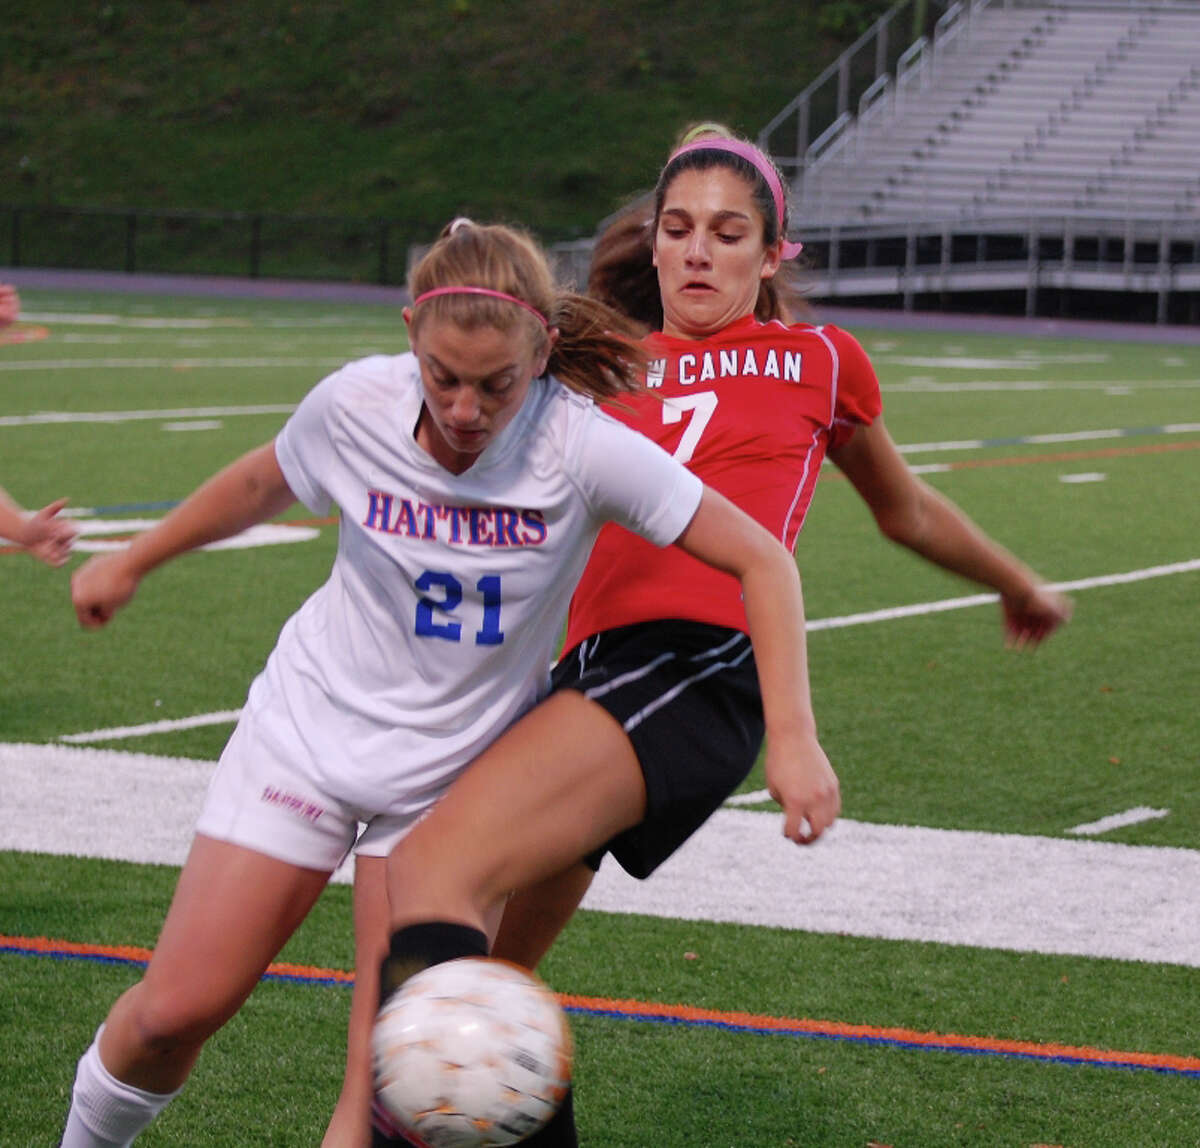 New Canaan's Azada Amis-Aslani (No. 7) and Danbury's Charlotte Blain (No. 21) get tangled up going for the ball during Danburyís 2-1 win at Danbury High School on Monday, Oct. 14, 2013. Contributed photo by Kim Persky.